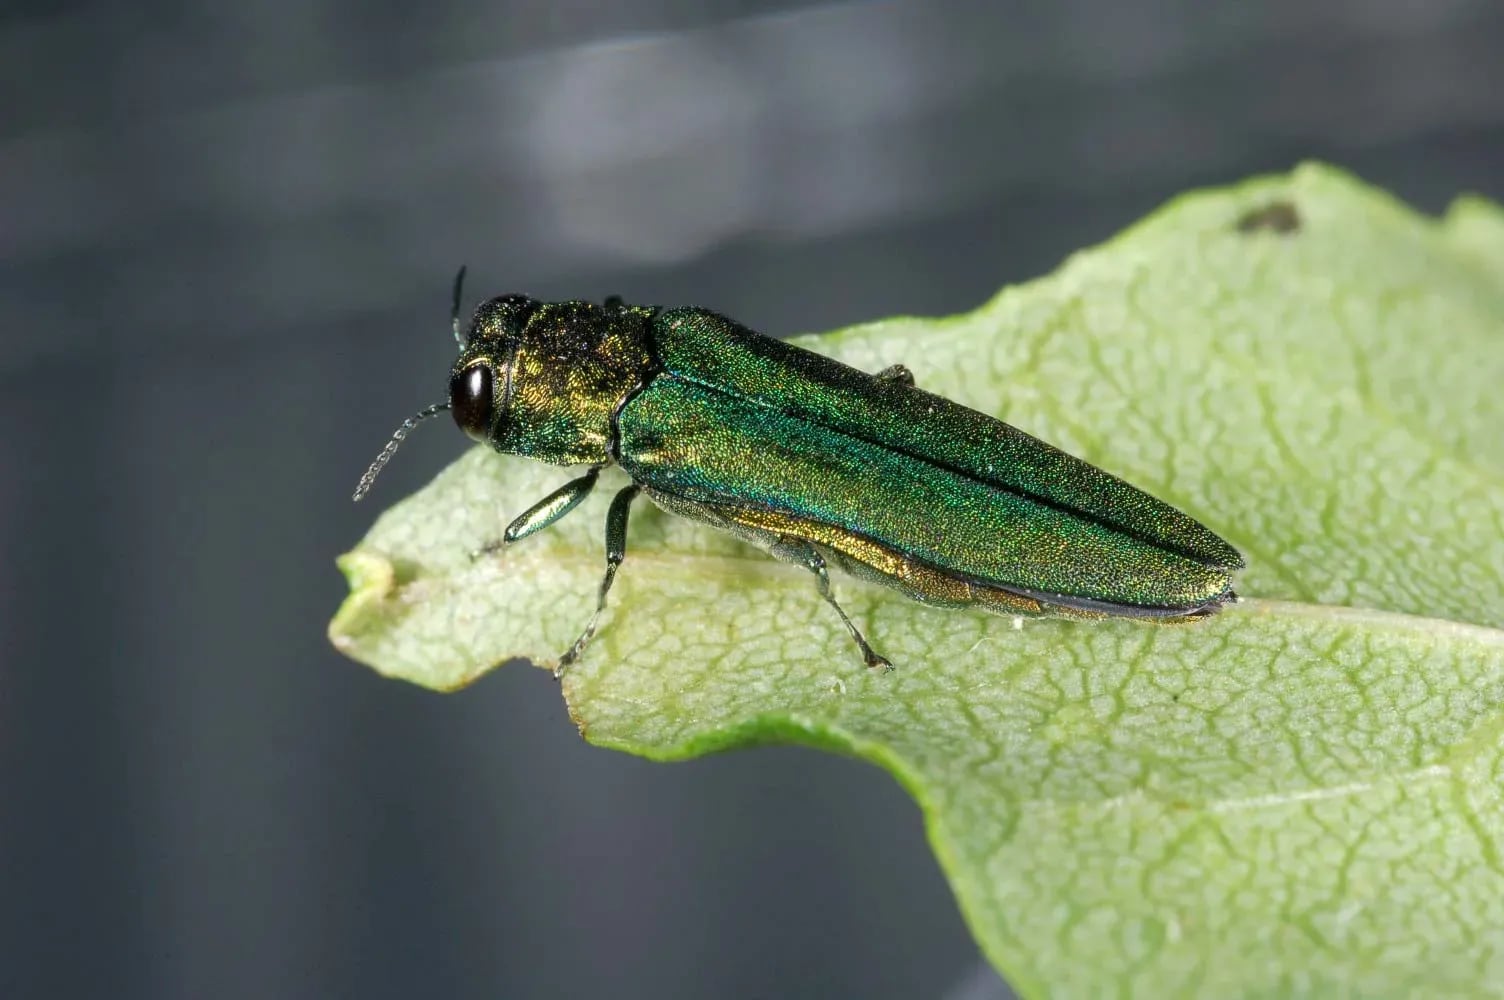 This undated photo shows the side view of an adult emerald ash borer. The invasive beetle is native to Asia and has killed more than 100 million ash trees in the U.S. since its arrival in 2002. It was first detected in Oregon in Forest Grove in June 2022.